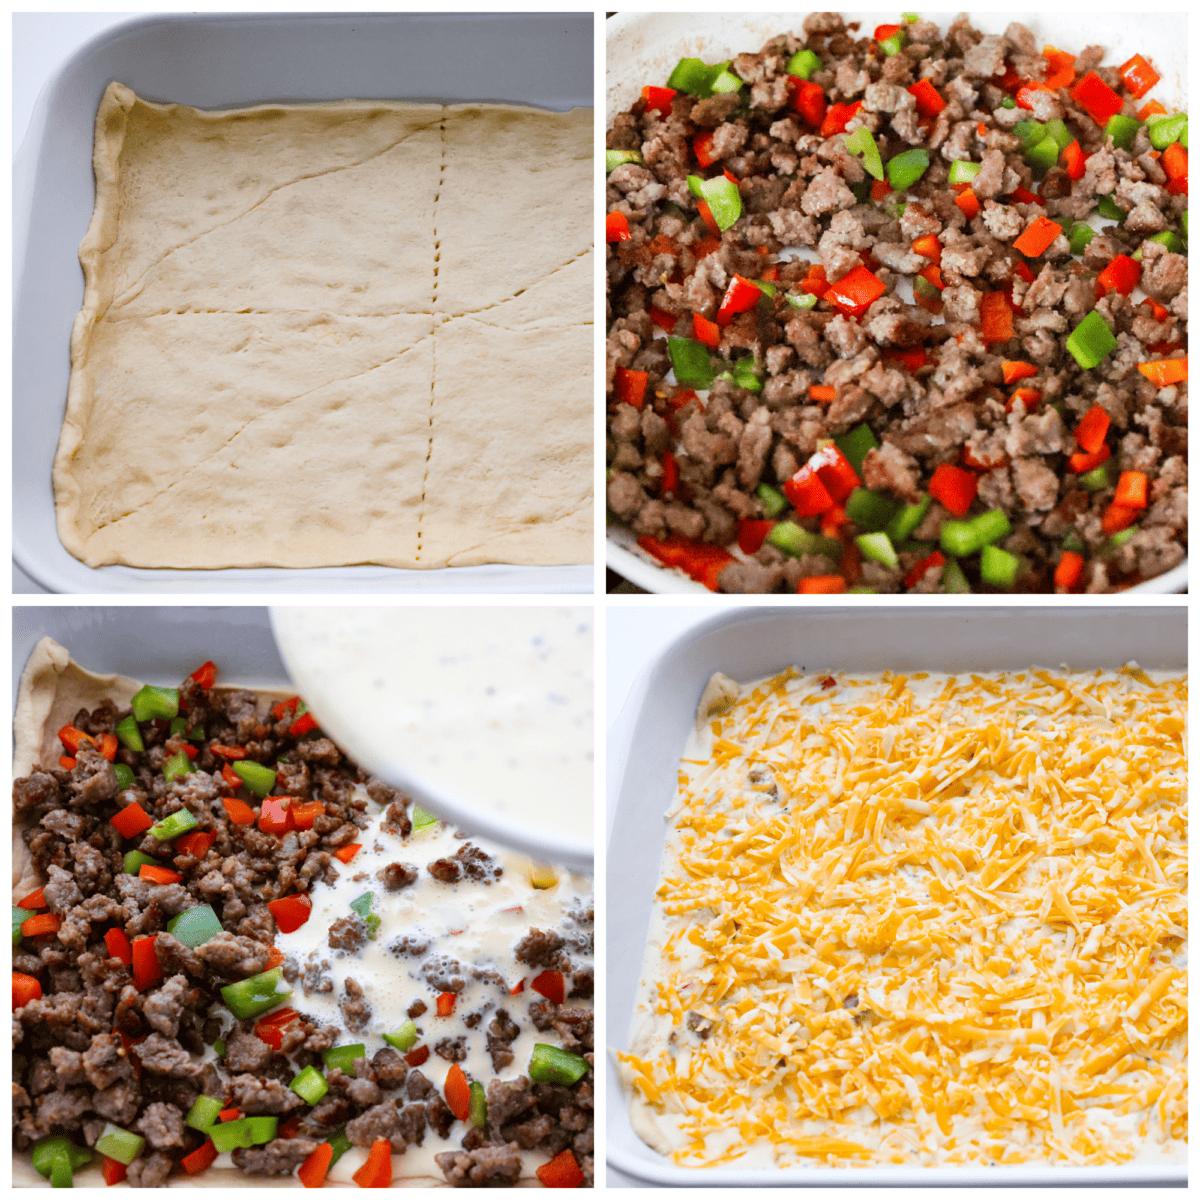 4-photo collage of the dough, sausage, eggs, and cheese being layered in a baking dish.